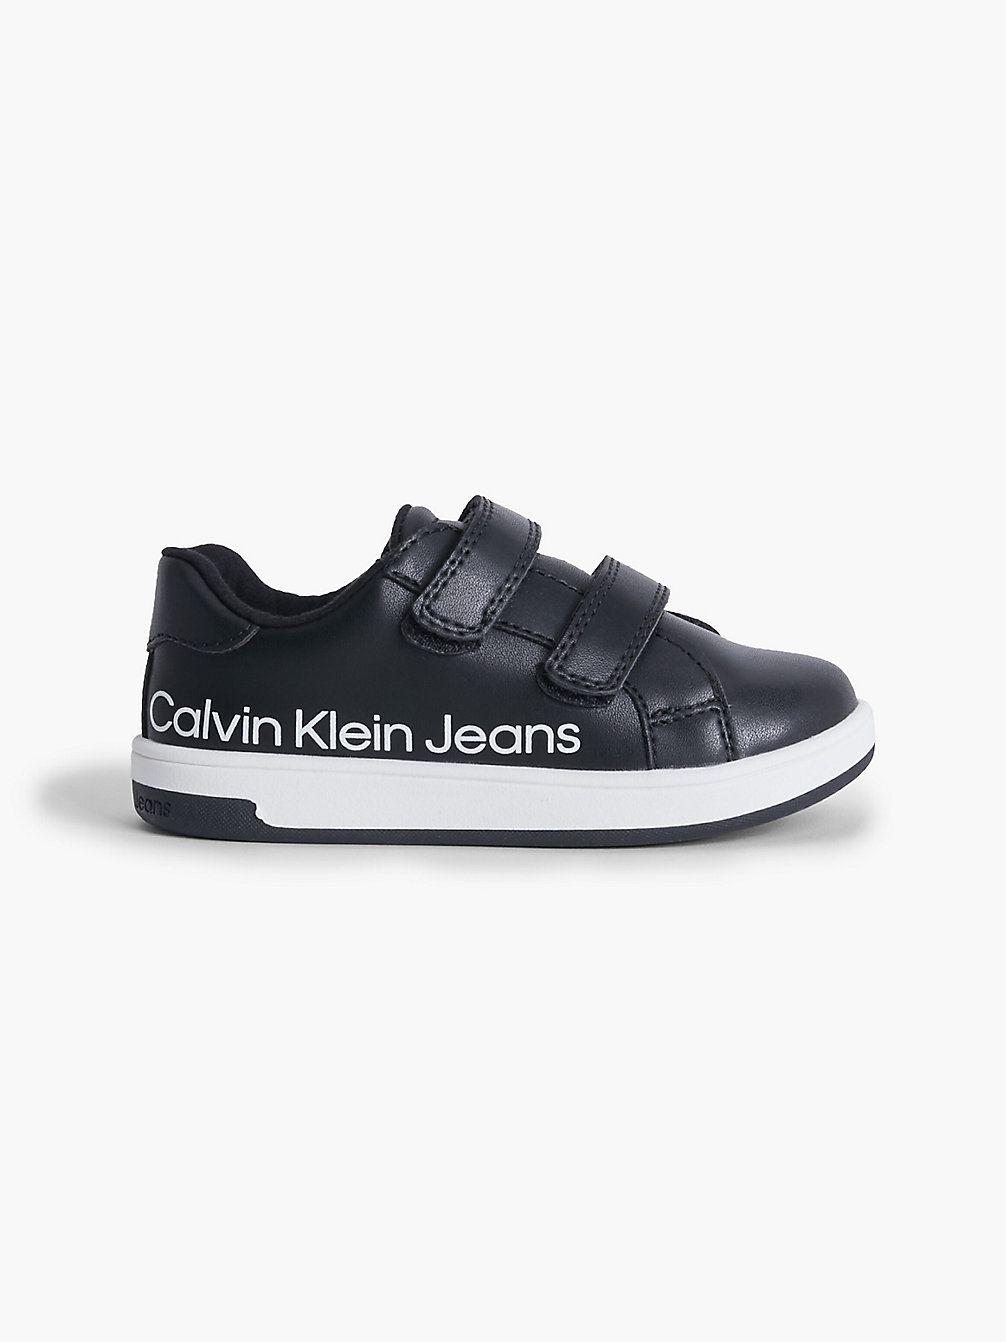 BLACK Recycled Toddlers-Kids Trainers undefined kids unisex Calvin Klein